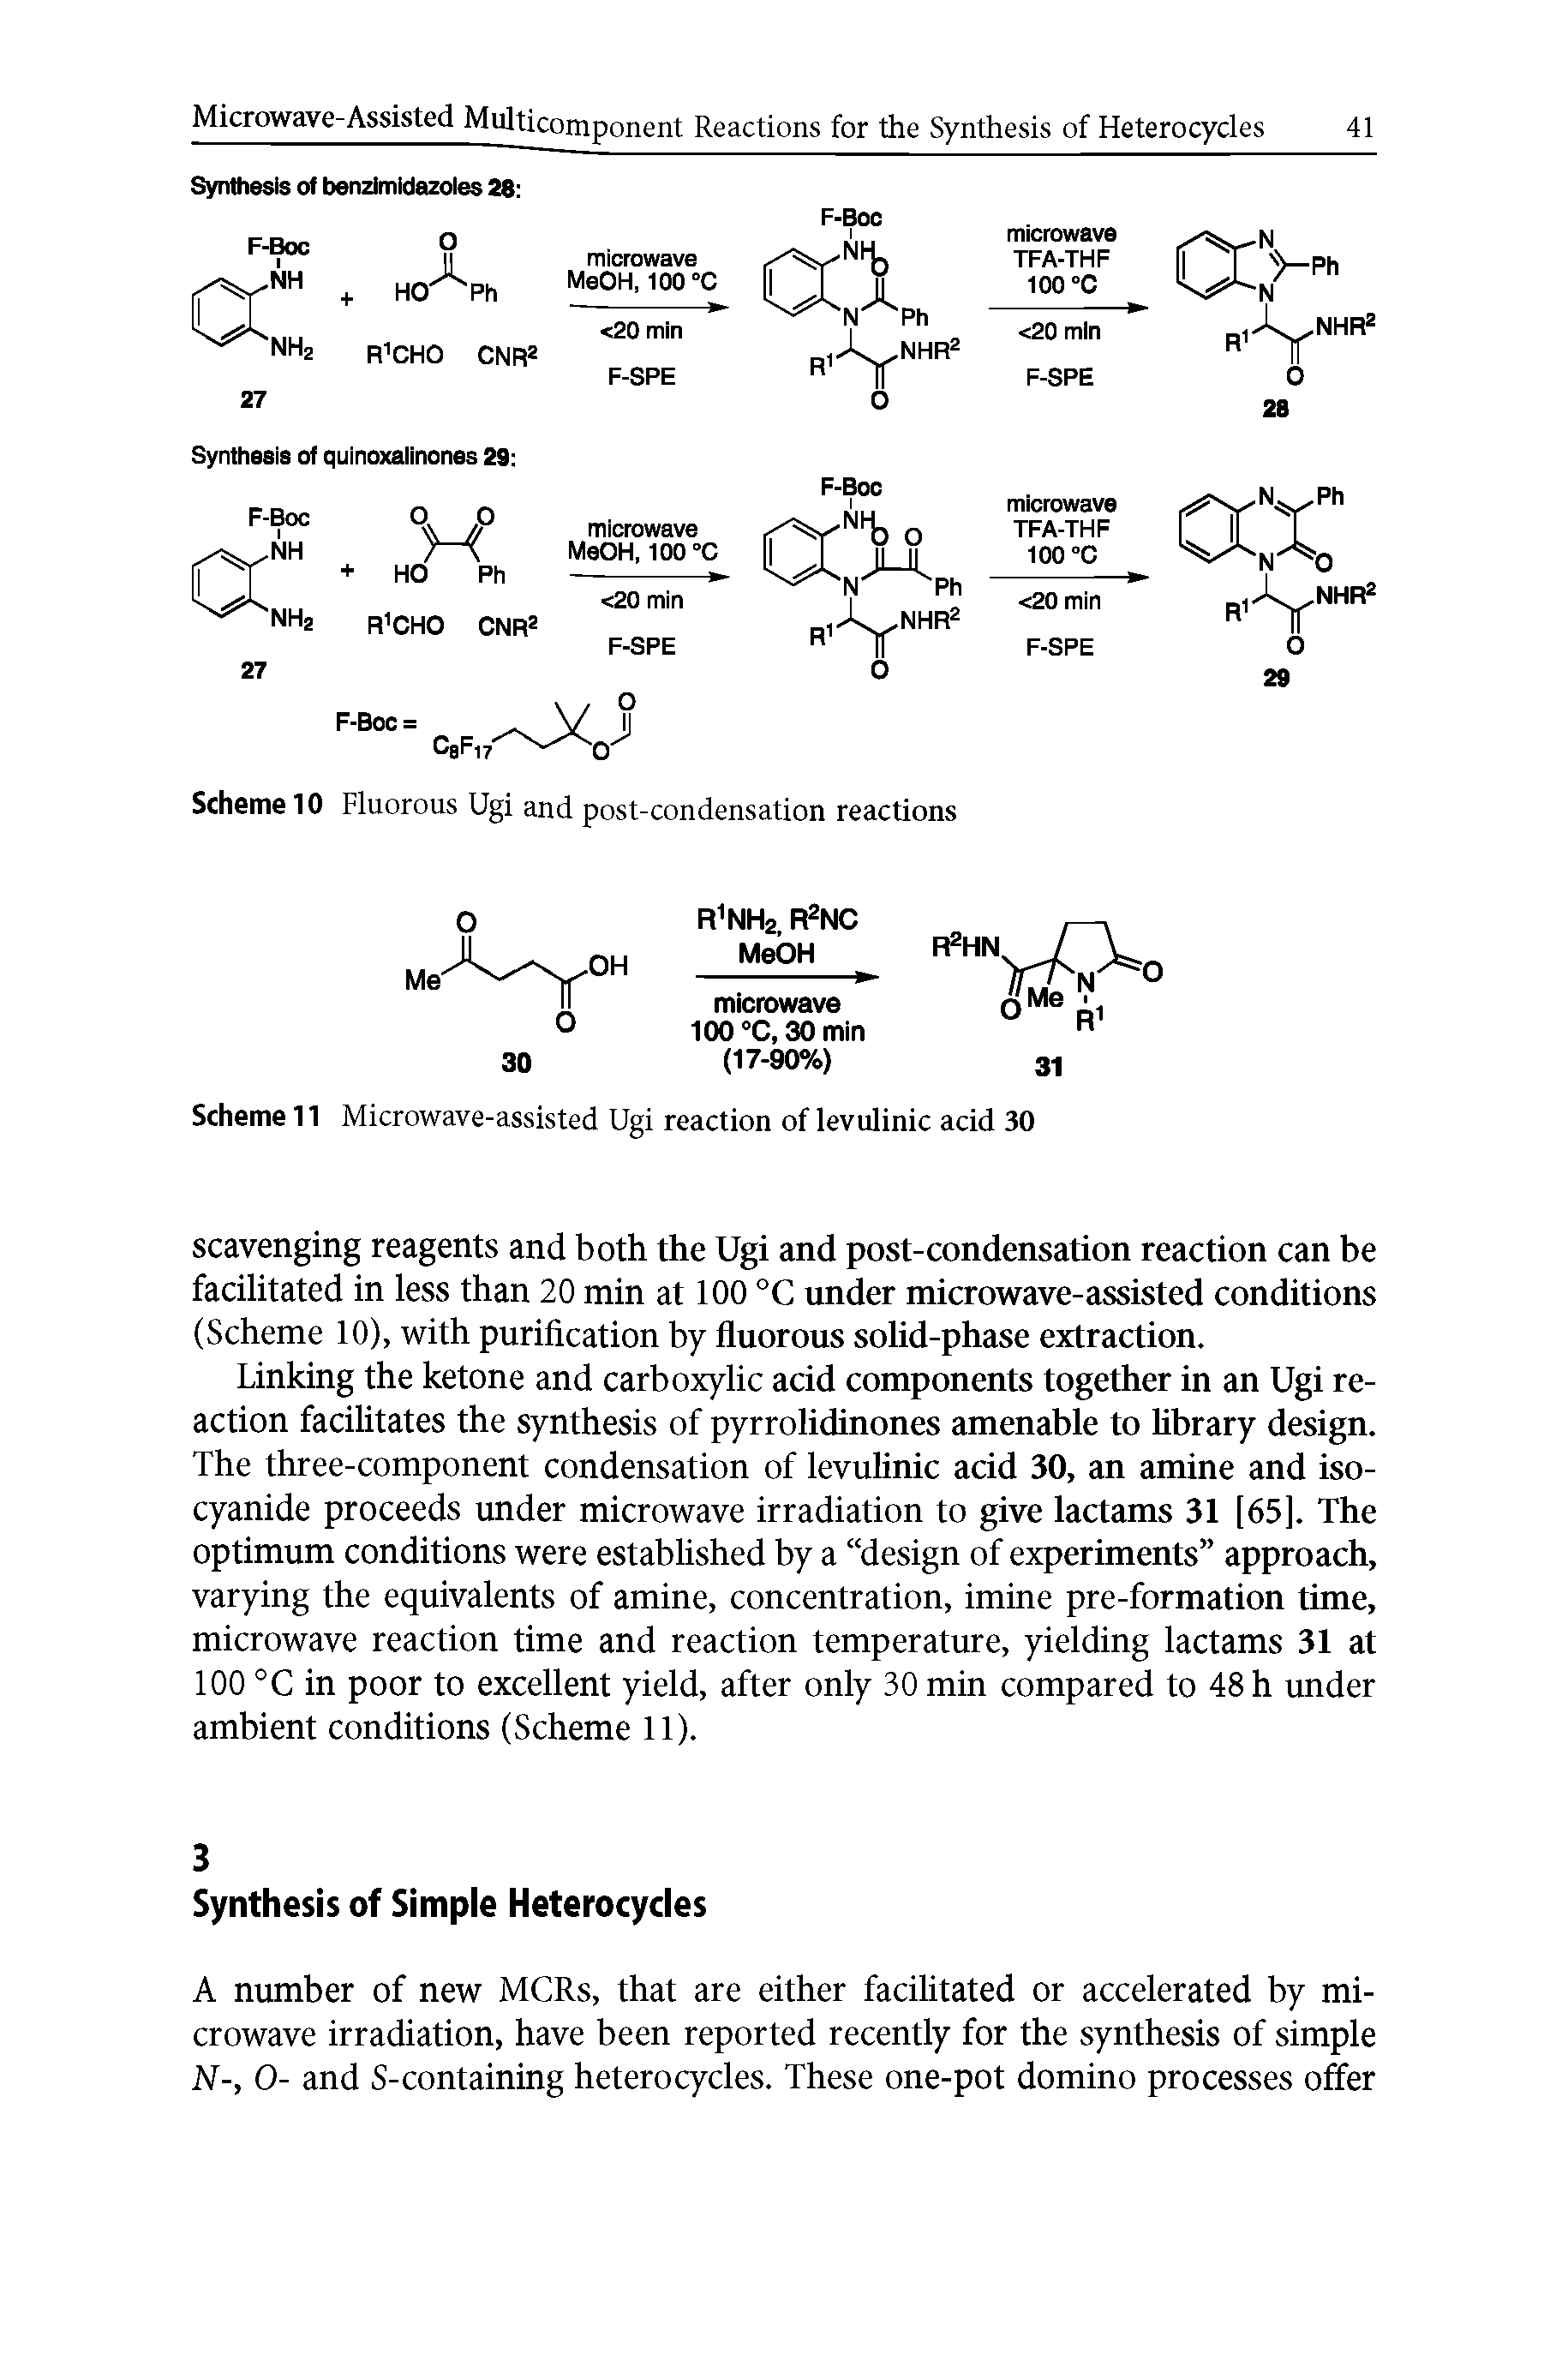 Scheme 11 Microwave-assisted Ugi reaction of levulinic acid 30...